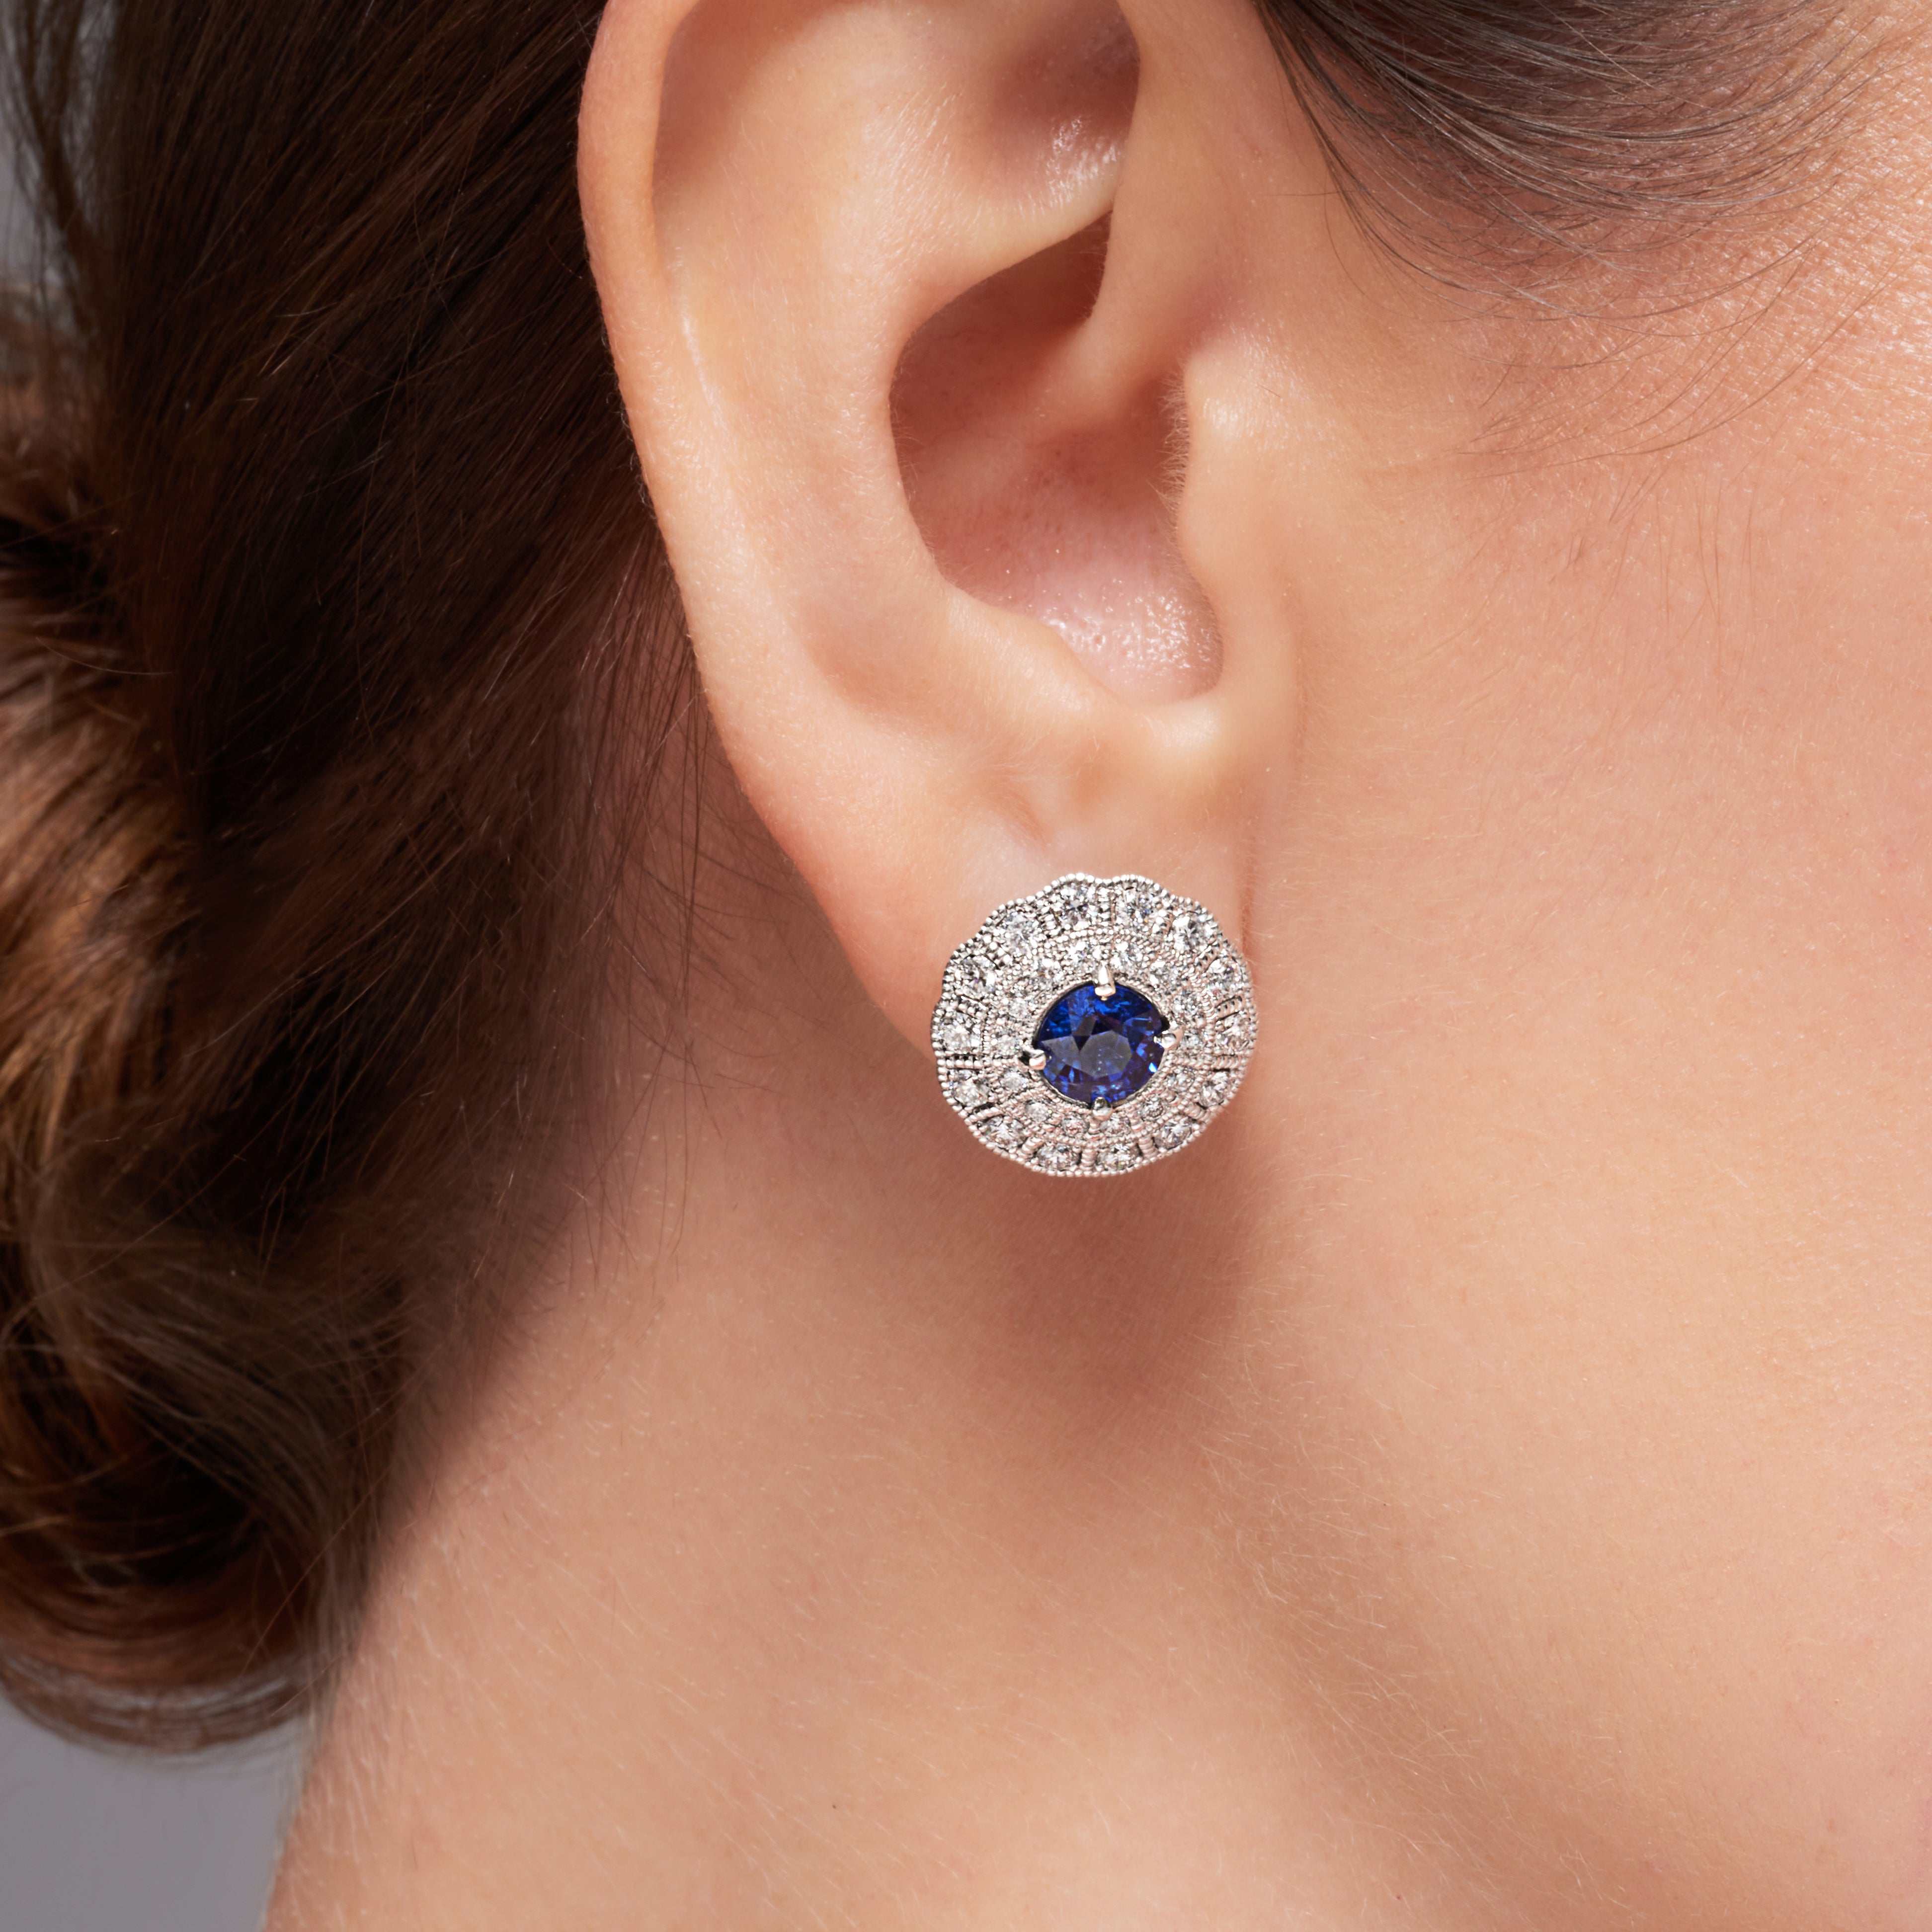 Blue Sapphire And Diamond Halo Earrings In 18 karat white gold